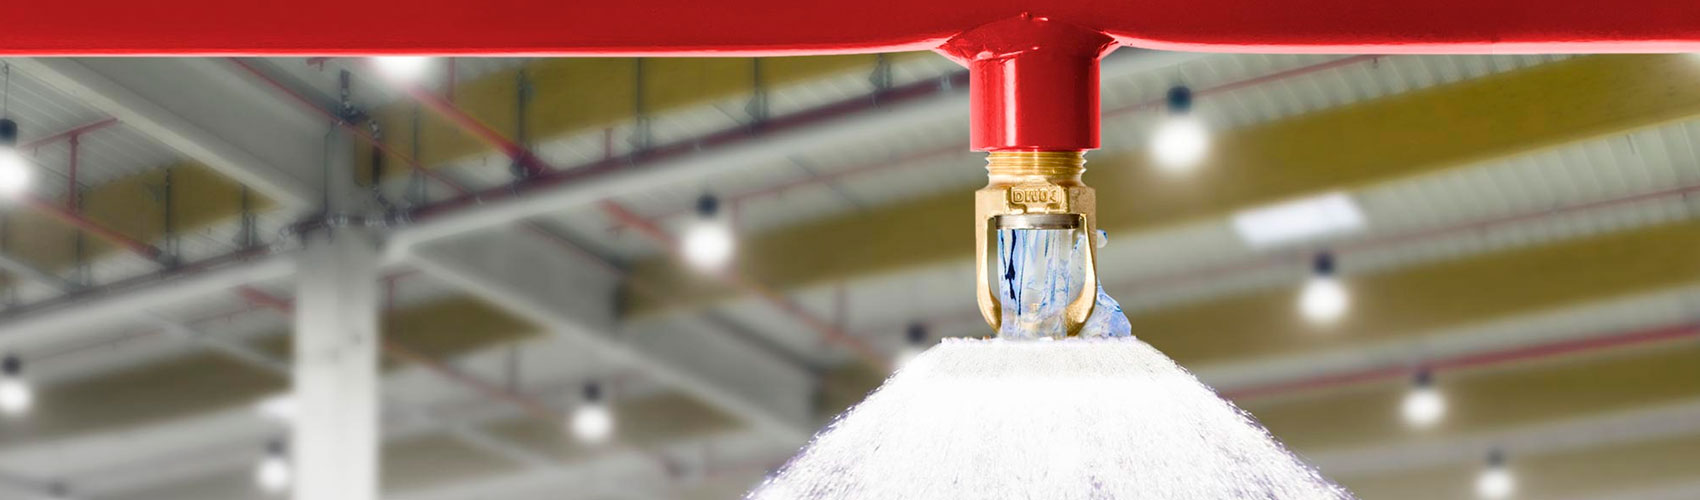 Fire sprinkler repair, certification, and inspection services